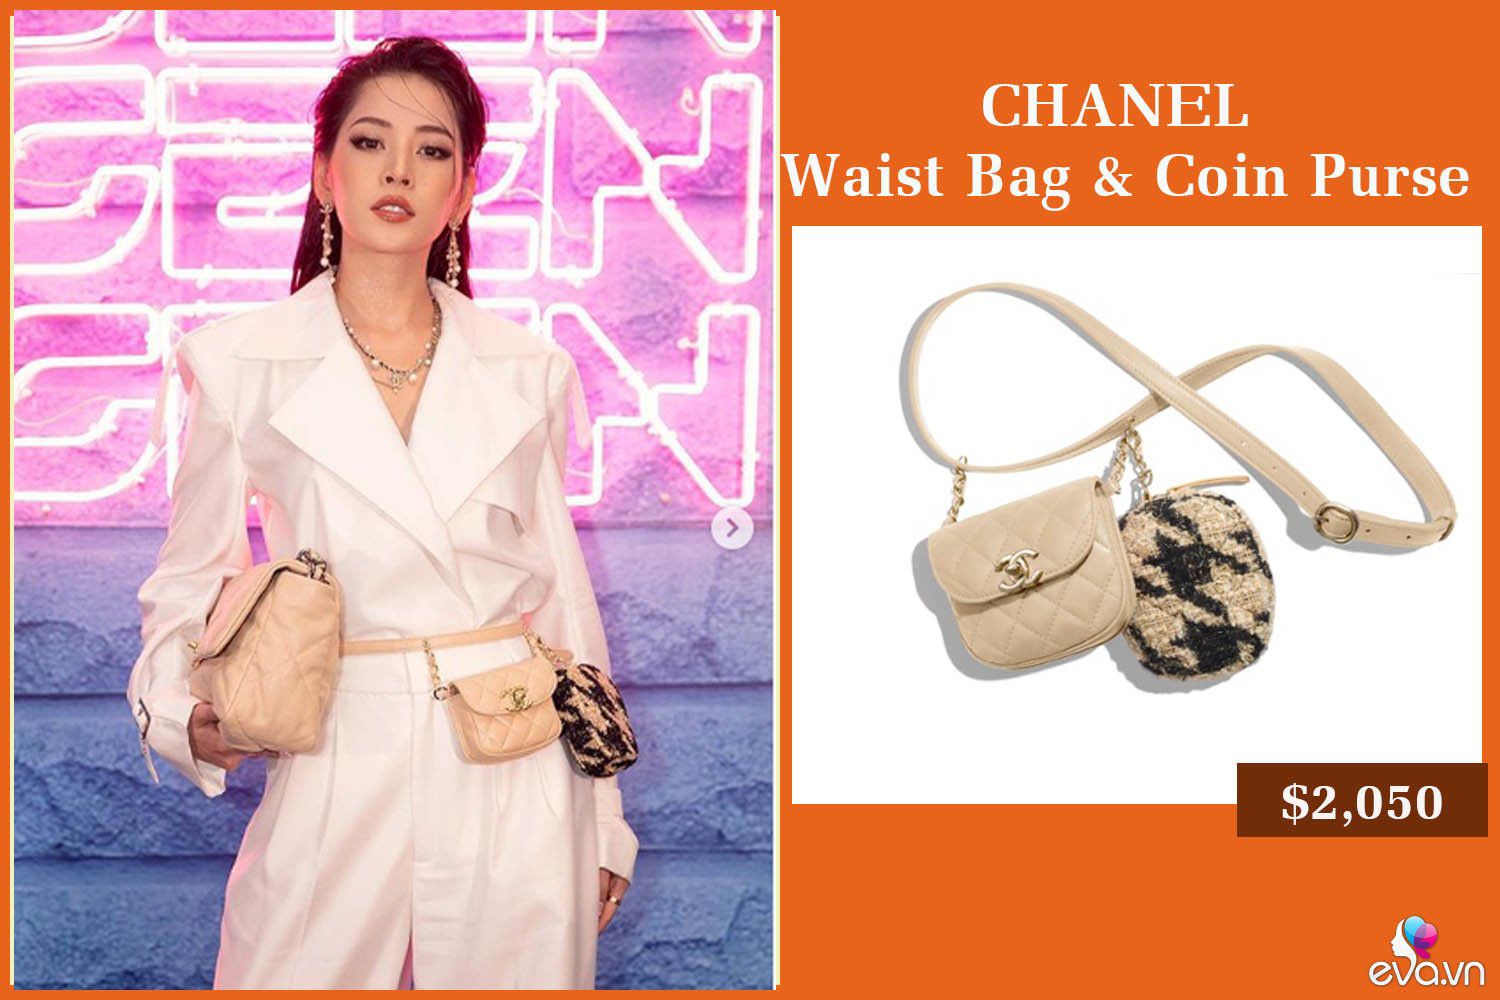 han quoc co jennie, viet nam co chi pu tham vong tro thanh “quy co chanel” - 5